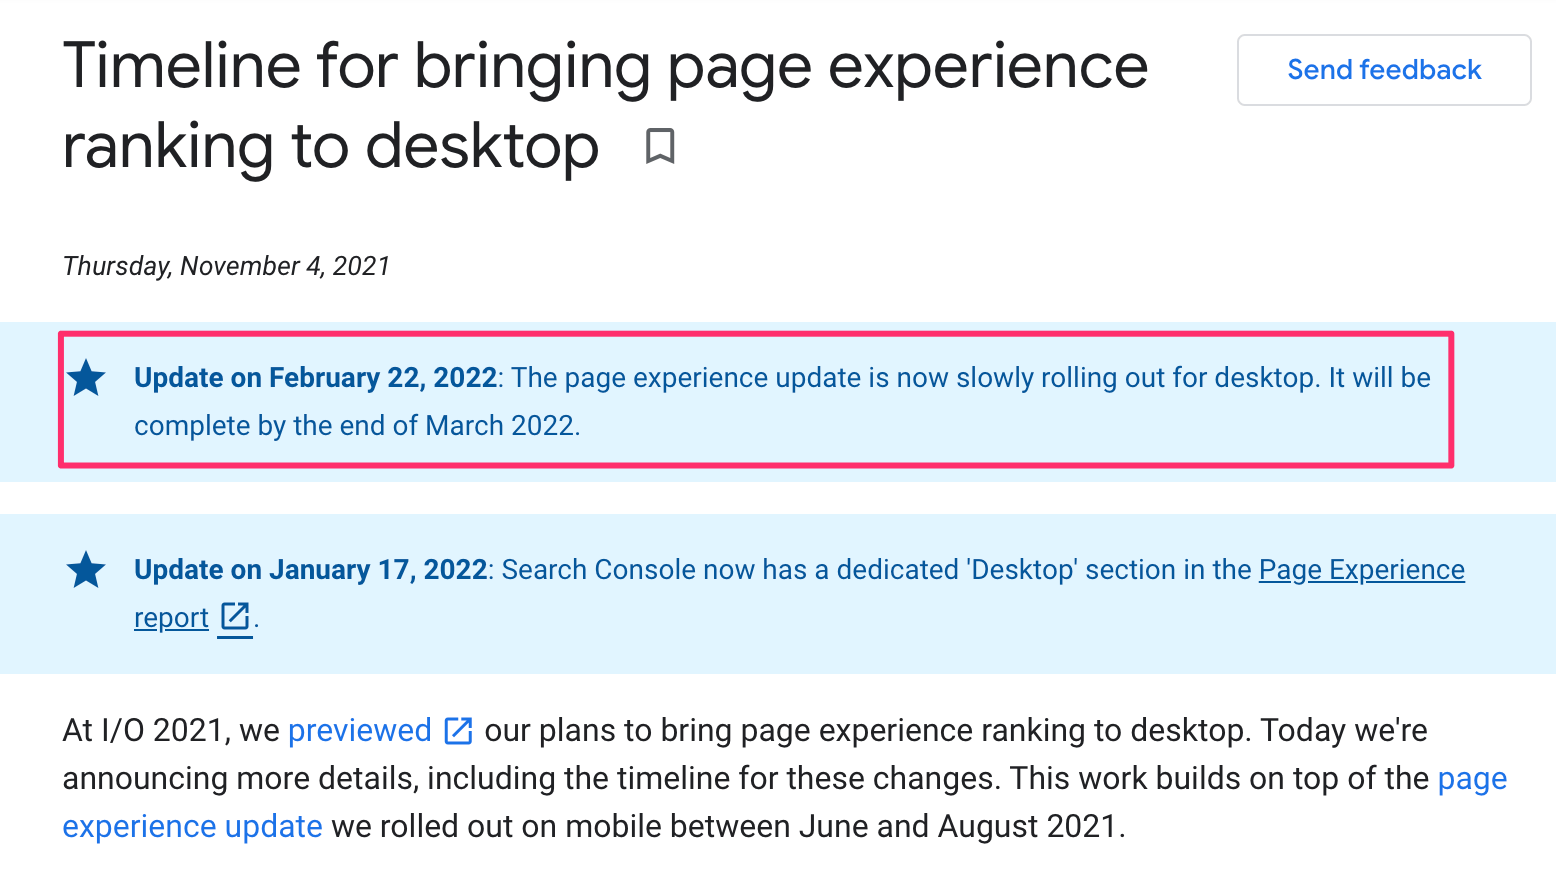 Update on February 22, 2022: The page experience update is now slowly rolling out for desktop. It will be complete by the end of March 2022.